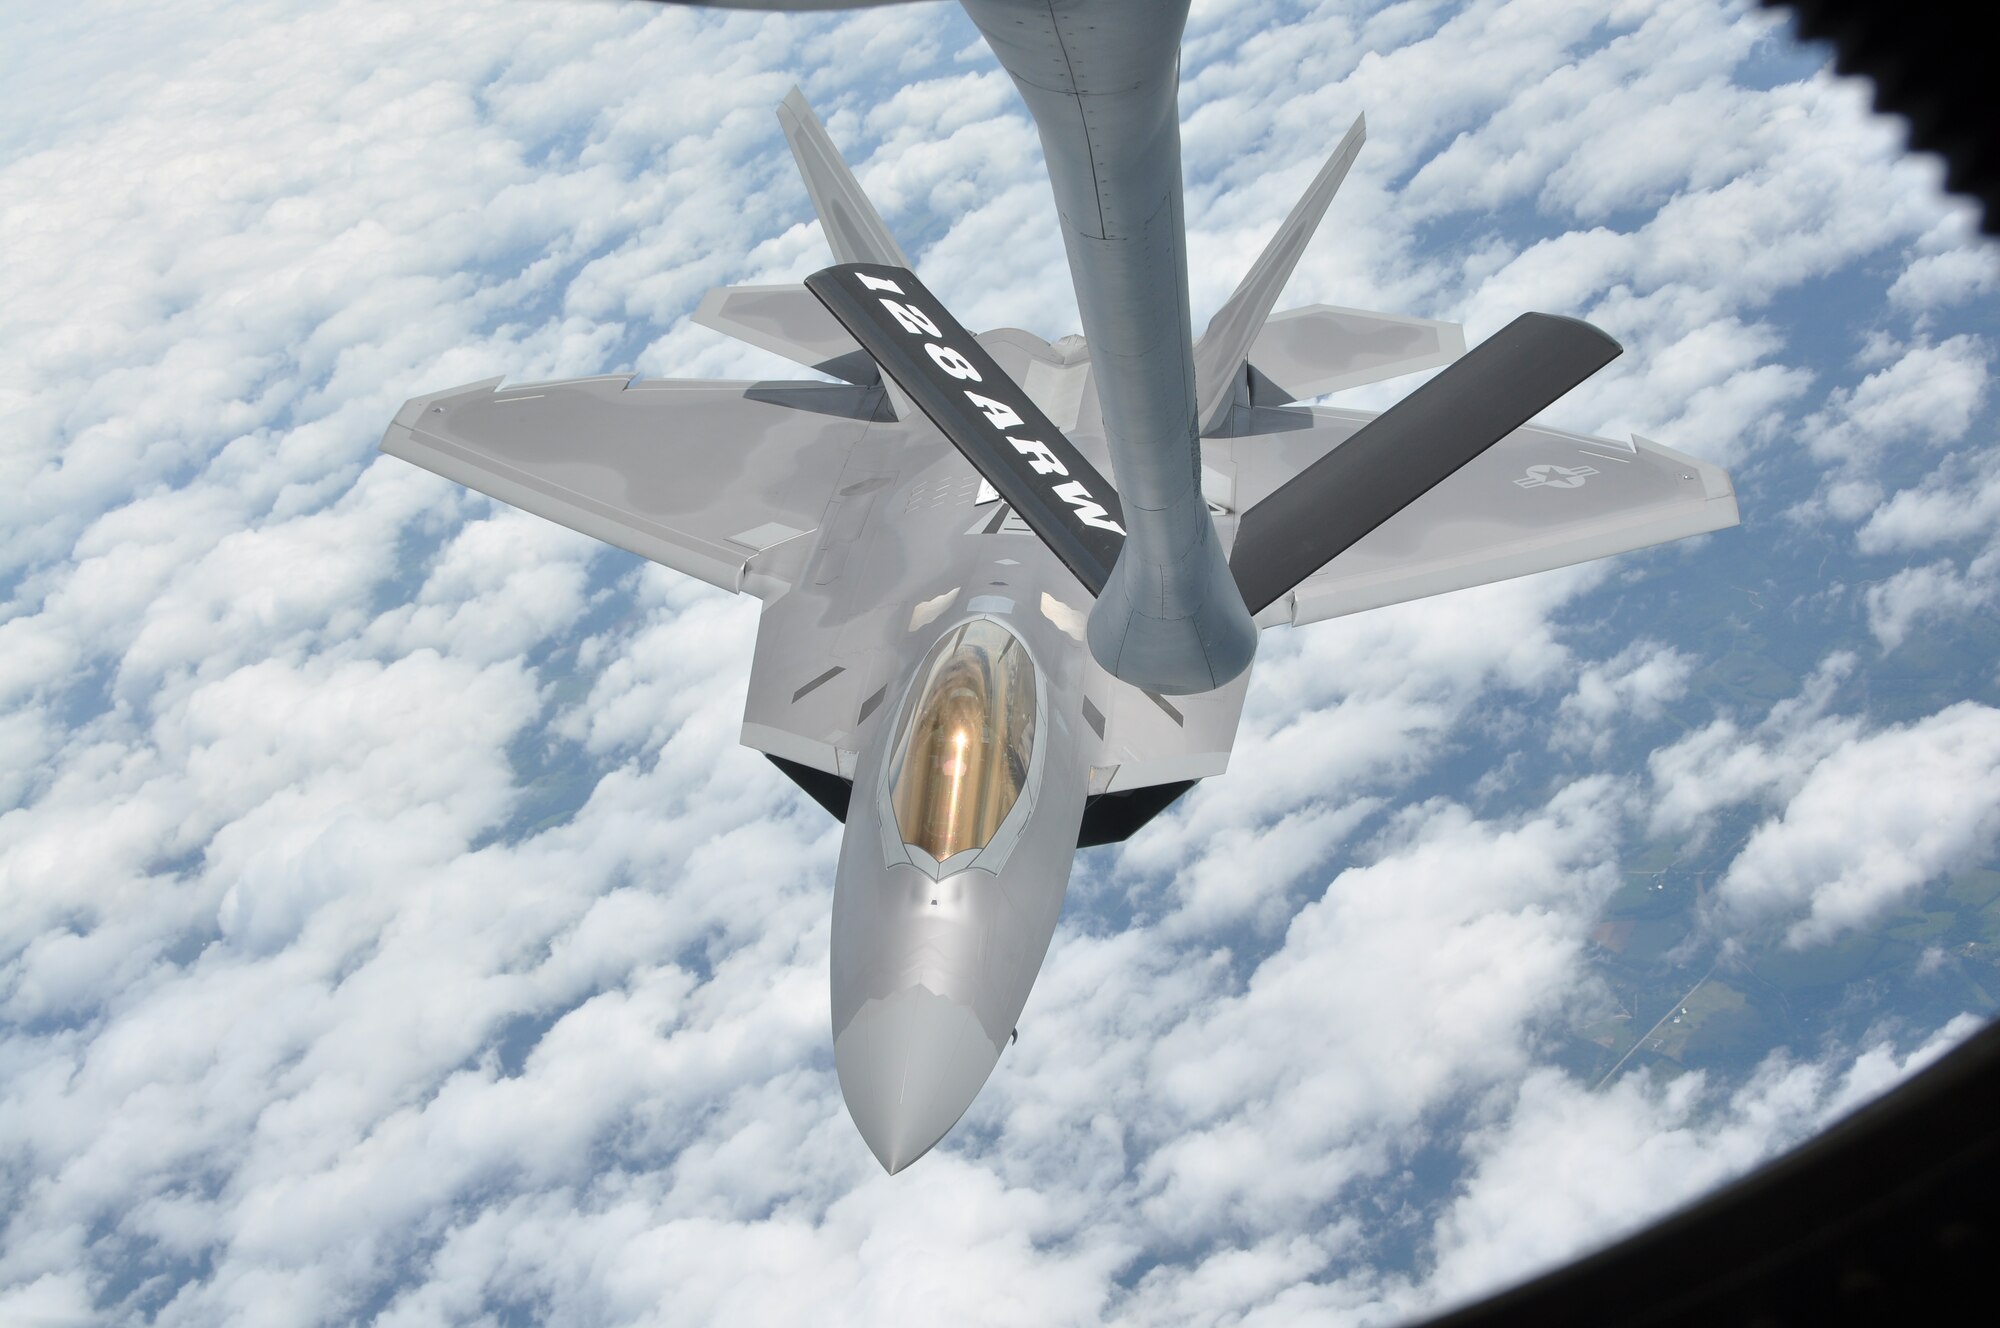 A pair of F-22 Raptors  practice refueling from a KC-135 Stratotanker on June 28, 2010. The F-22's were returning to Air Combat Command after participating in a joint training exercise with the 128th Air Refueling Wing.(US Air Force Photo by SSgt Jeremy Wilson / Released)